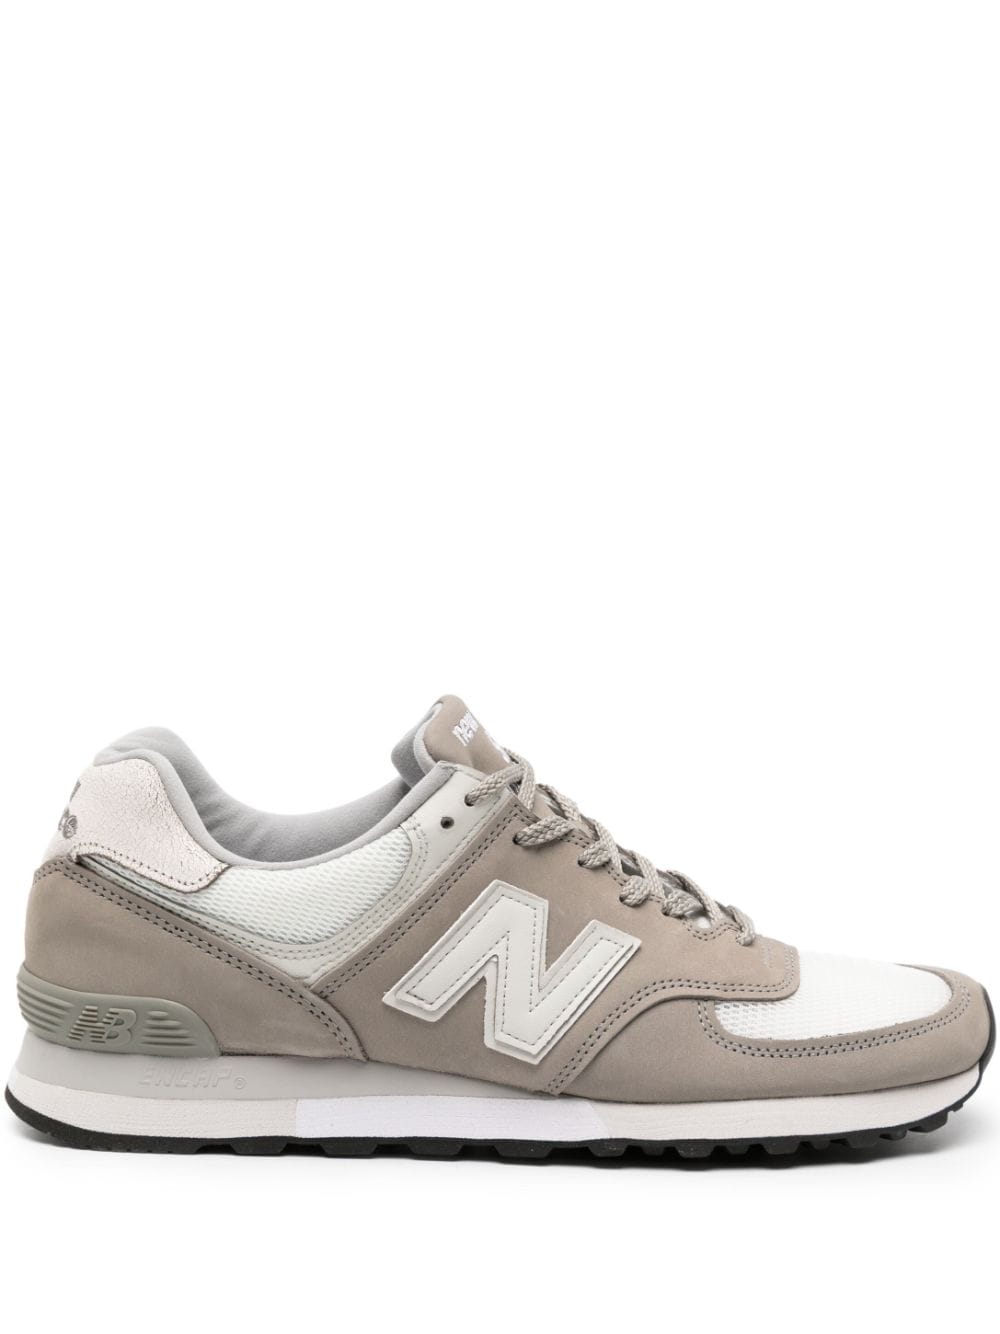 NEW BALANCE 576 MADE IN UK trainers